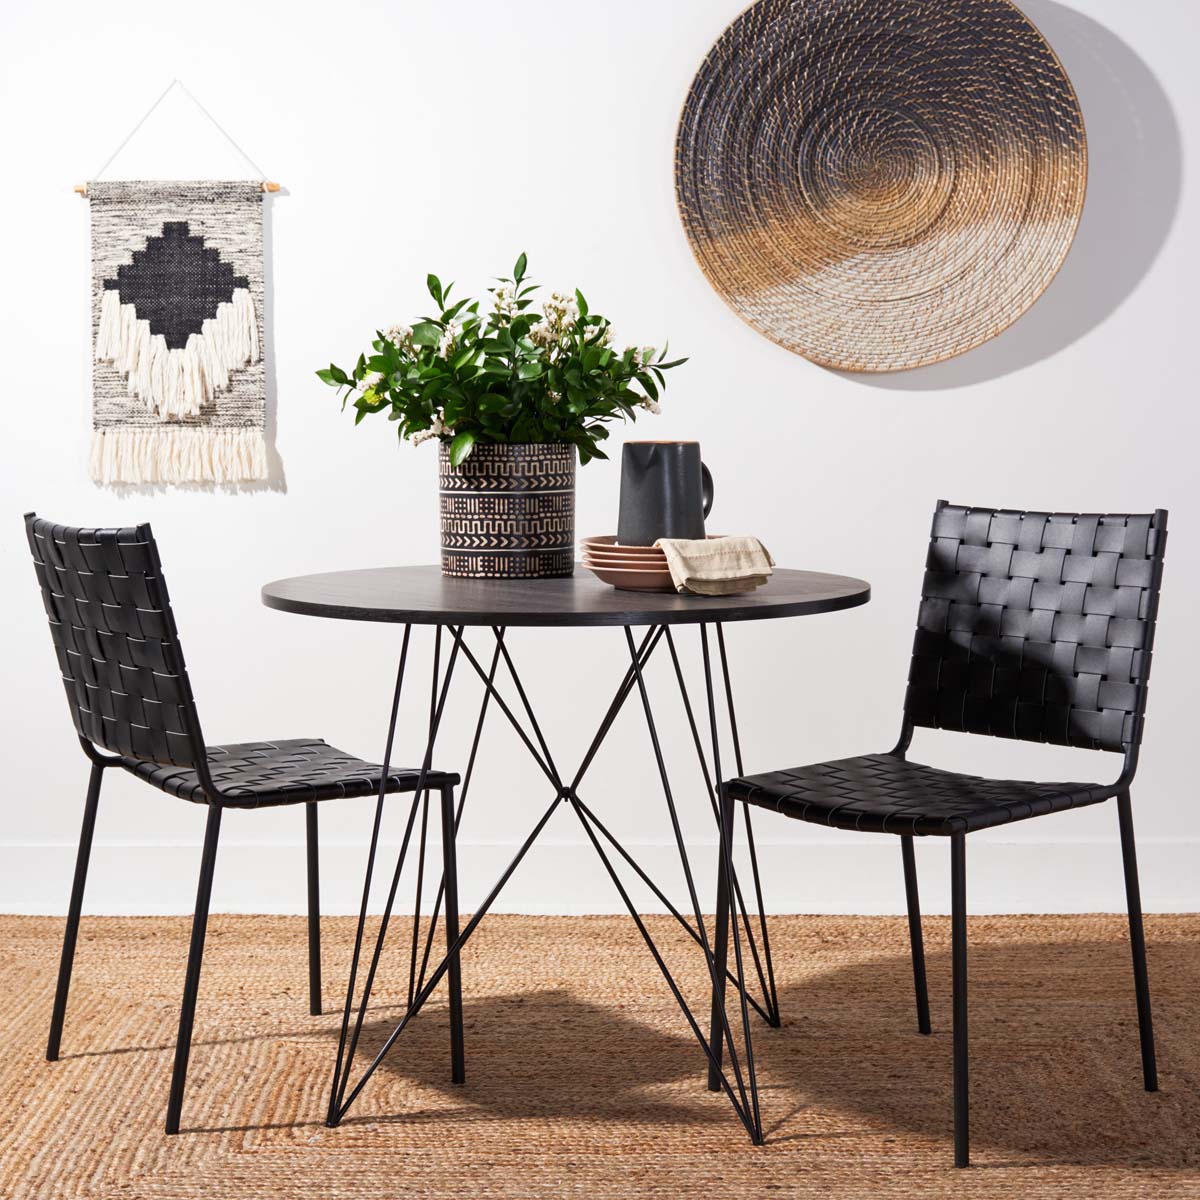 Safavieh Wesson Woven Dining Chair (Set of 2), DCH3005